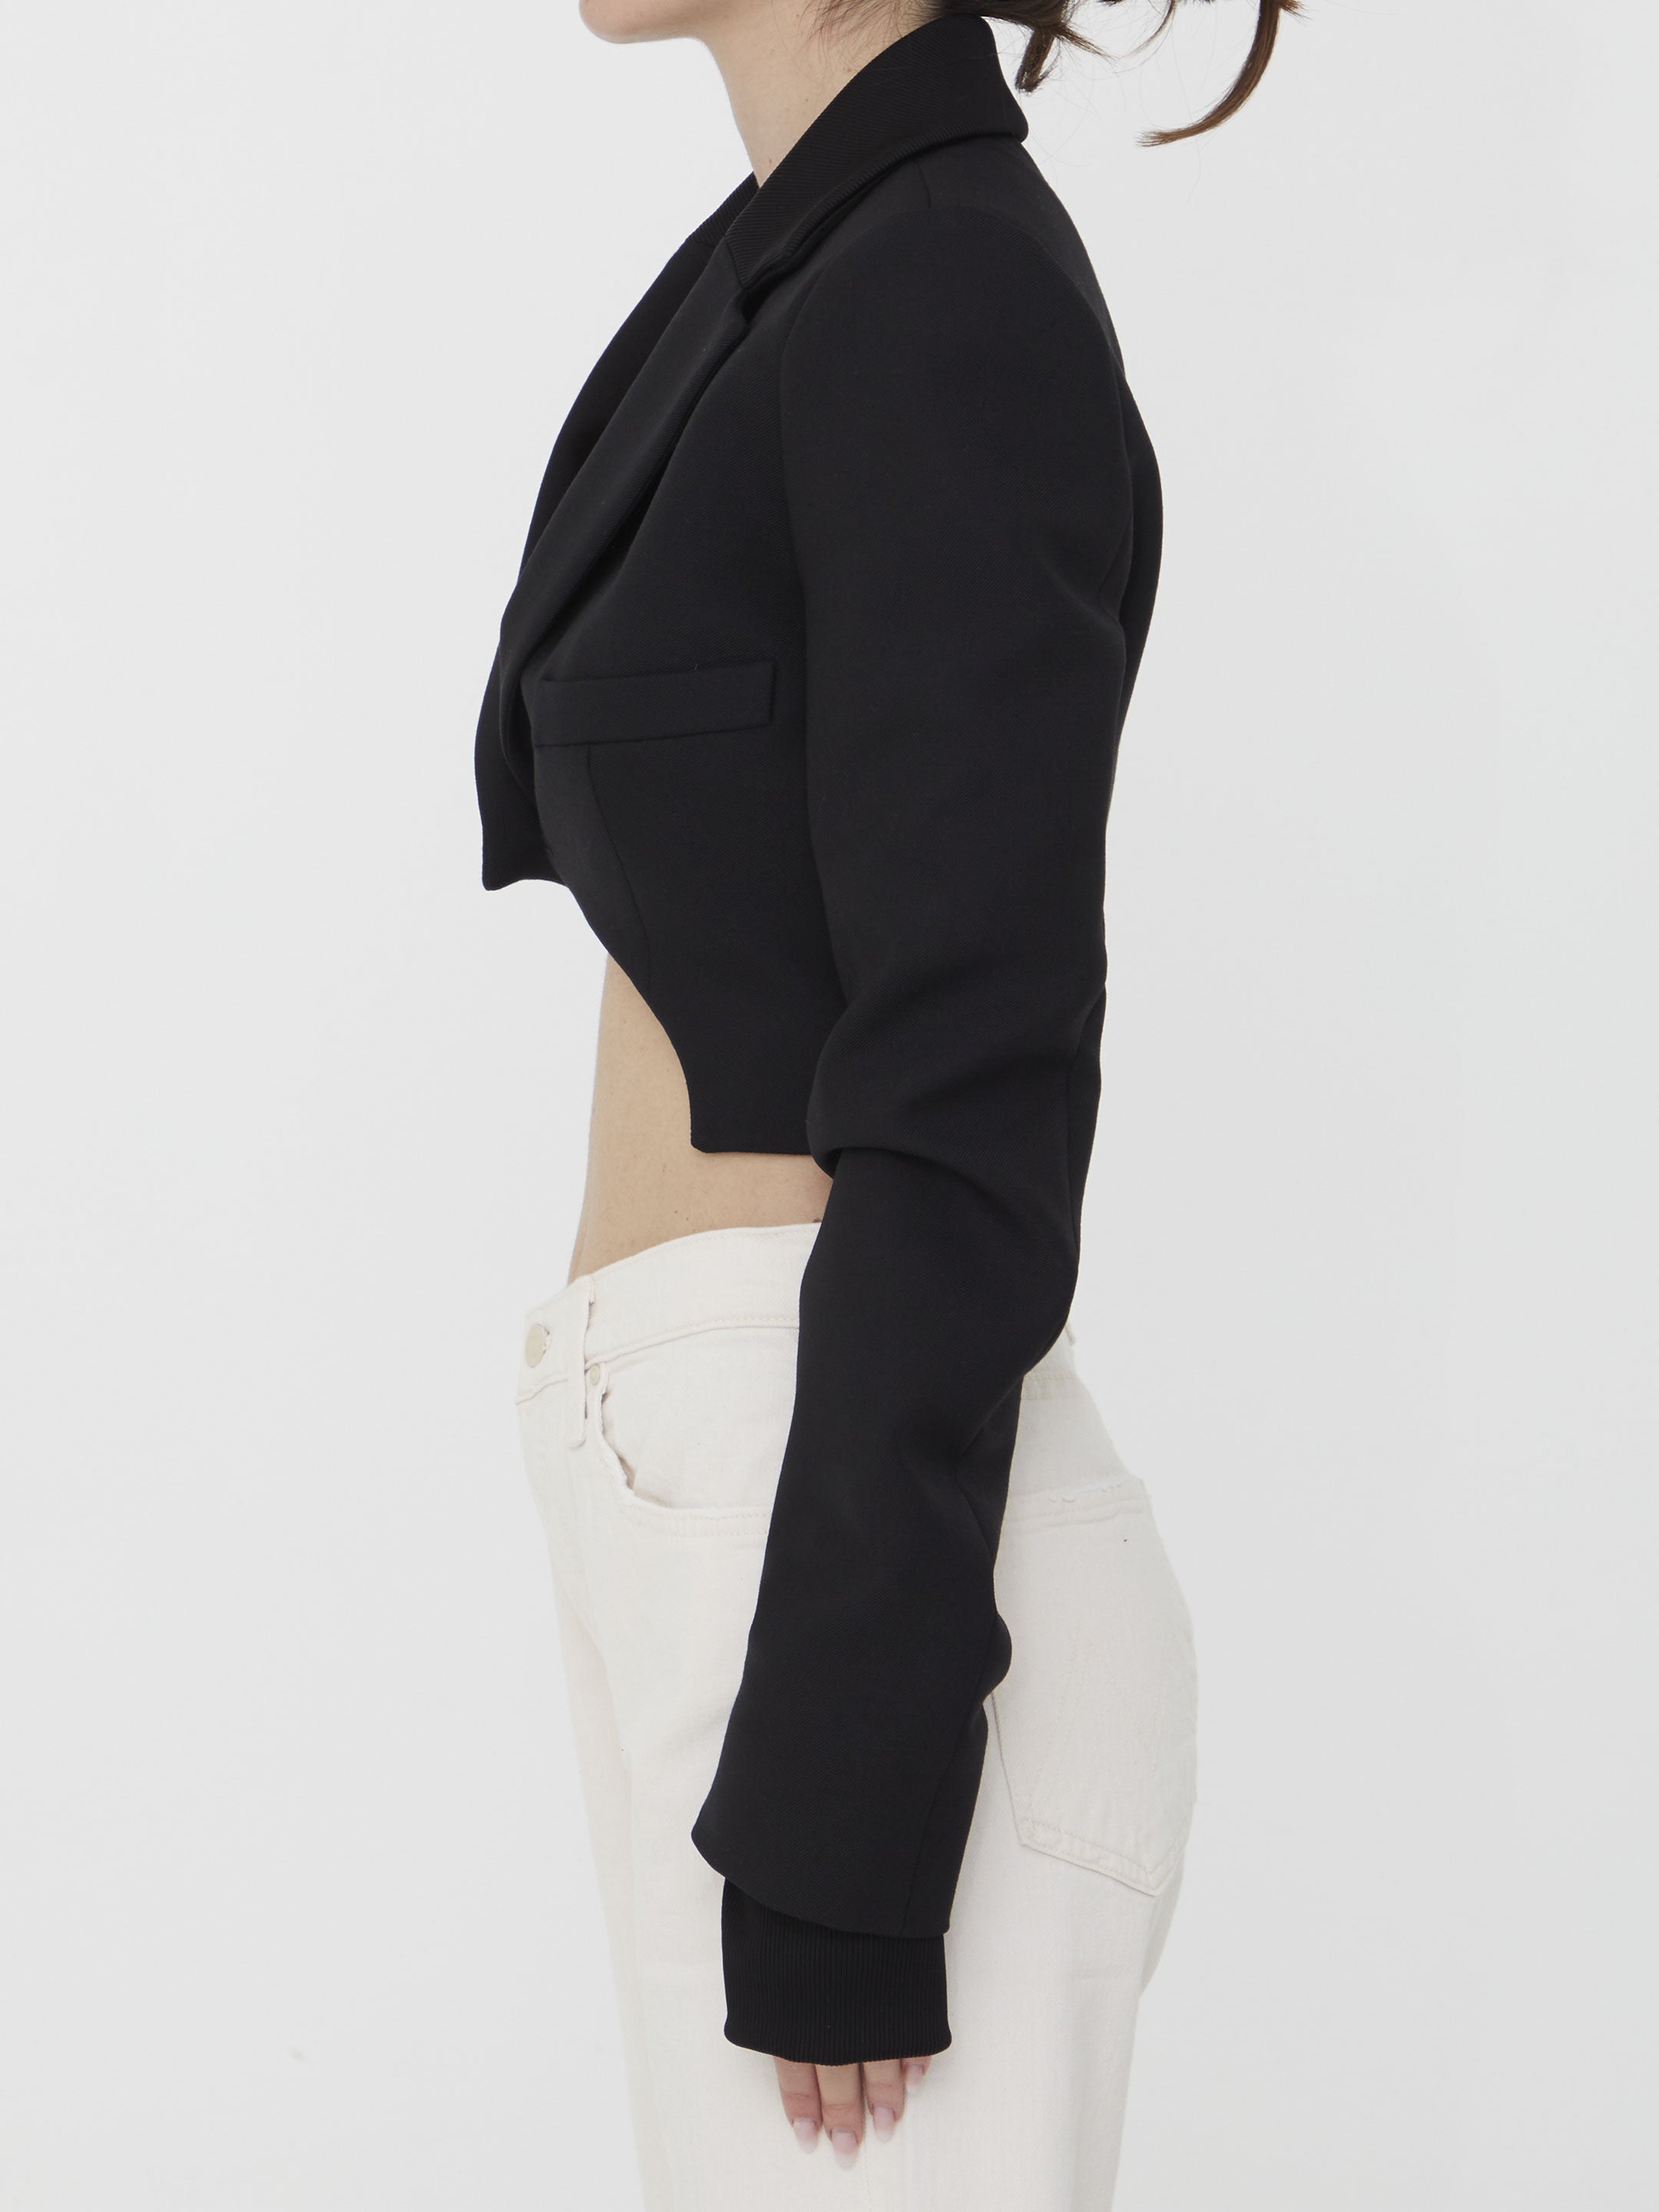 OFF-WHITE-OUTLET-SALE-Asymmetrical-cropped-jacket-Jacken-Mantel-ARCHIVE-COLLECTION-3.jpg